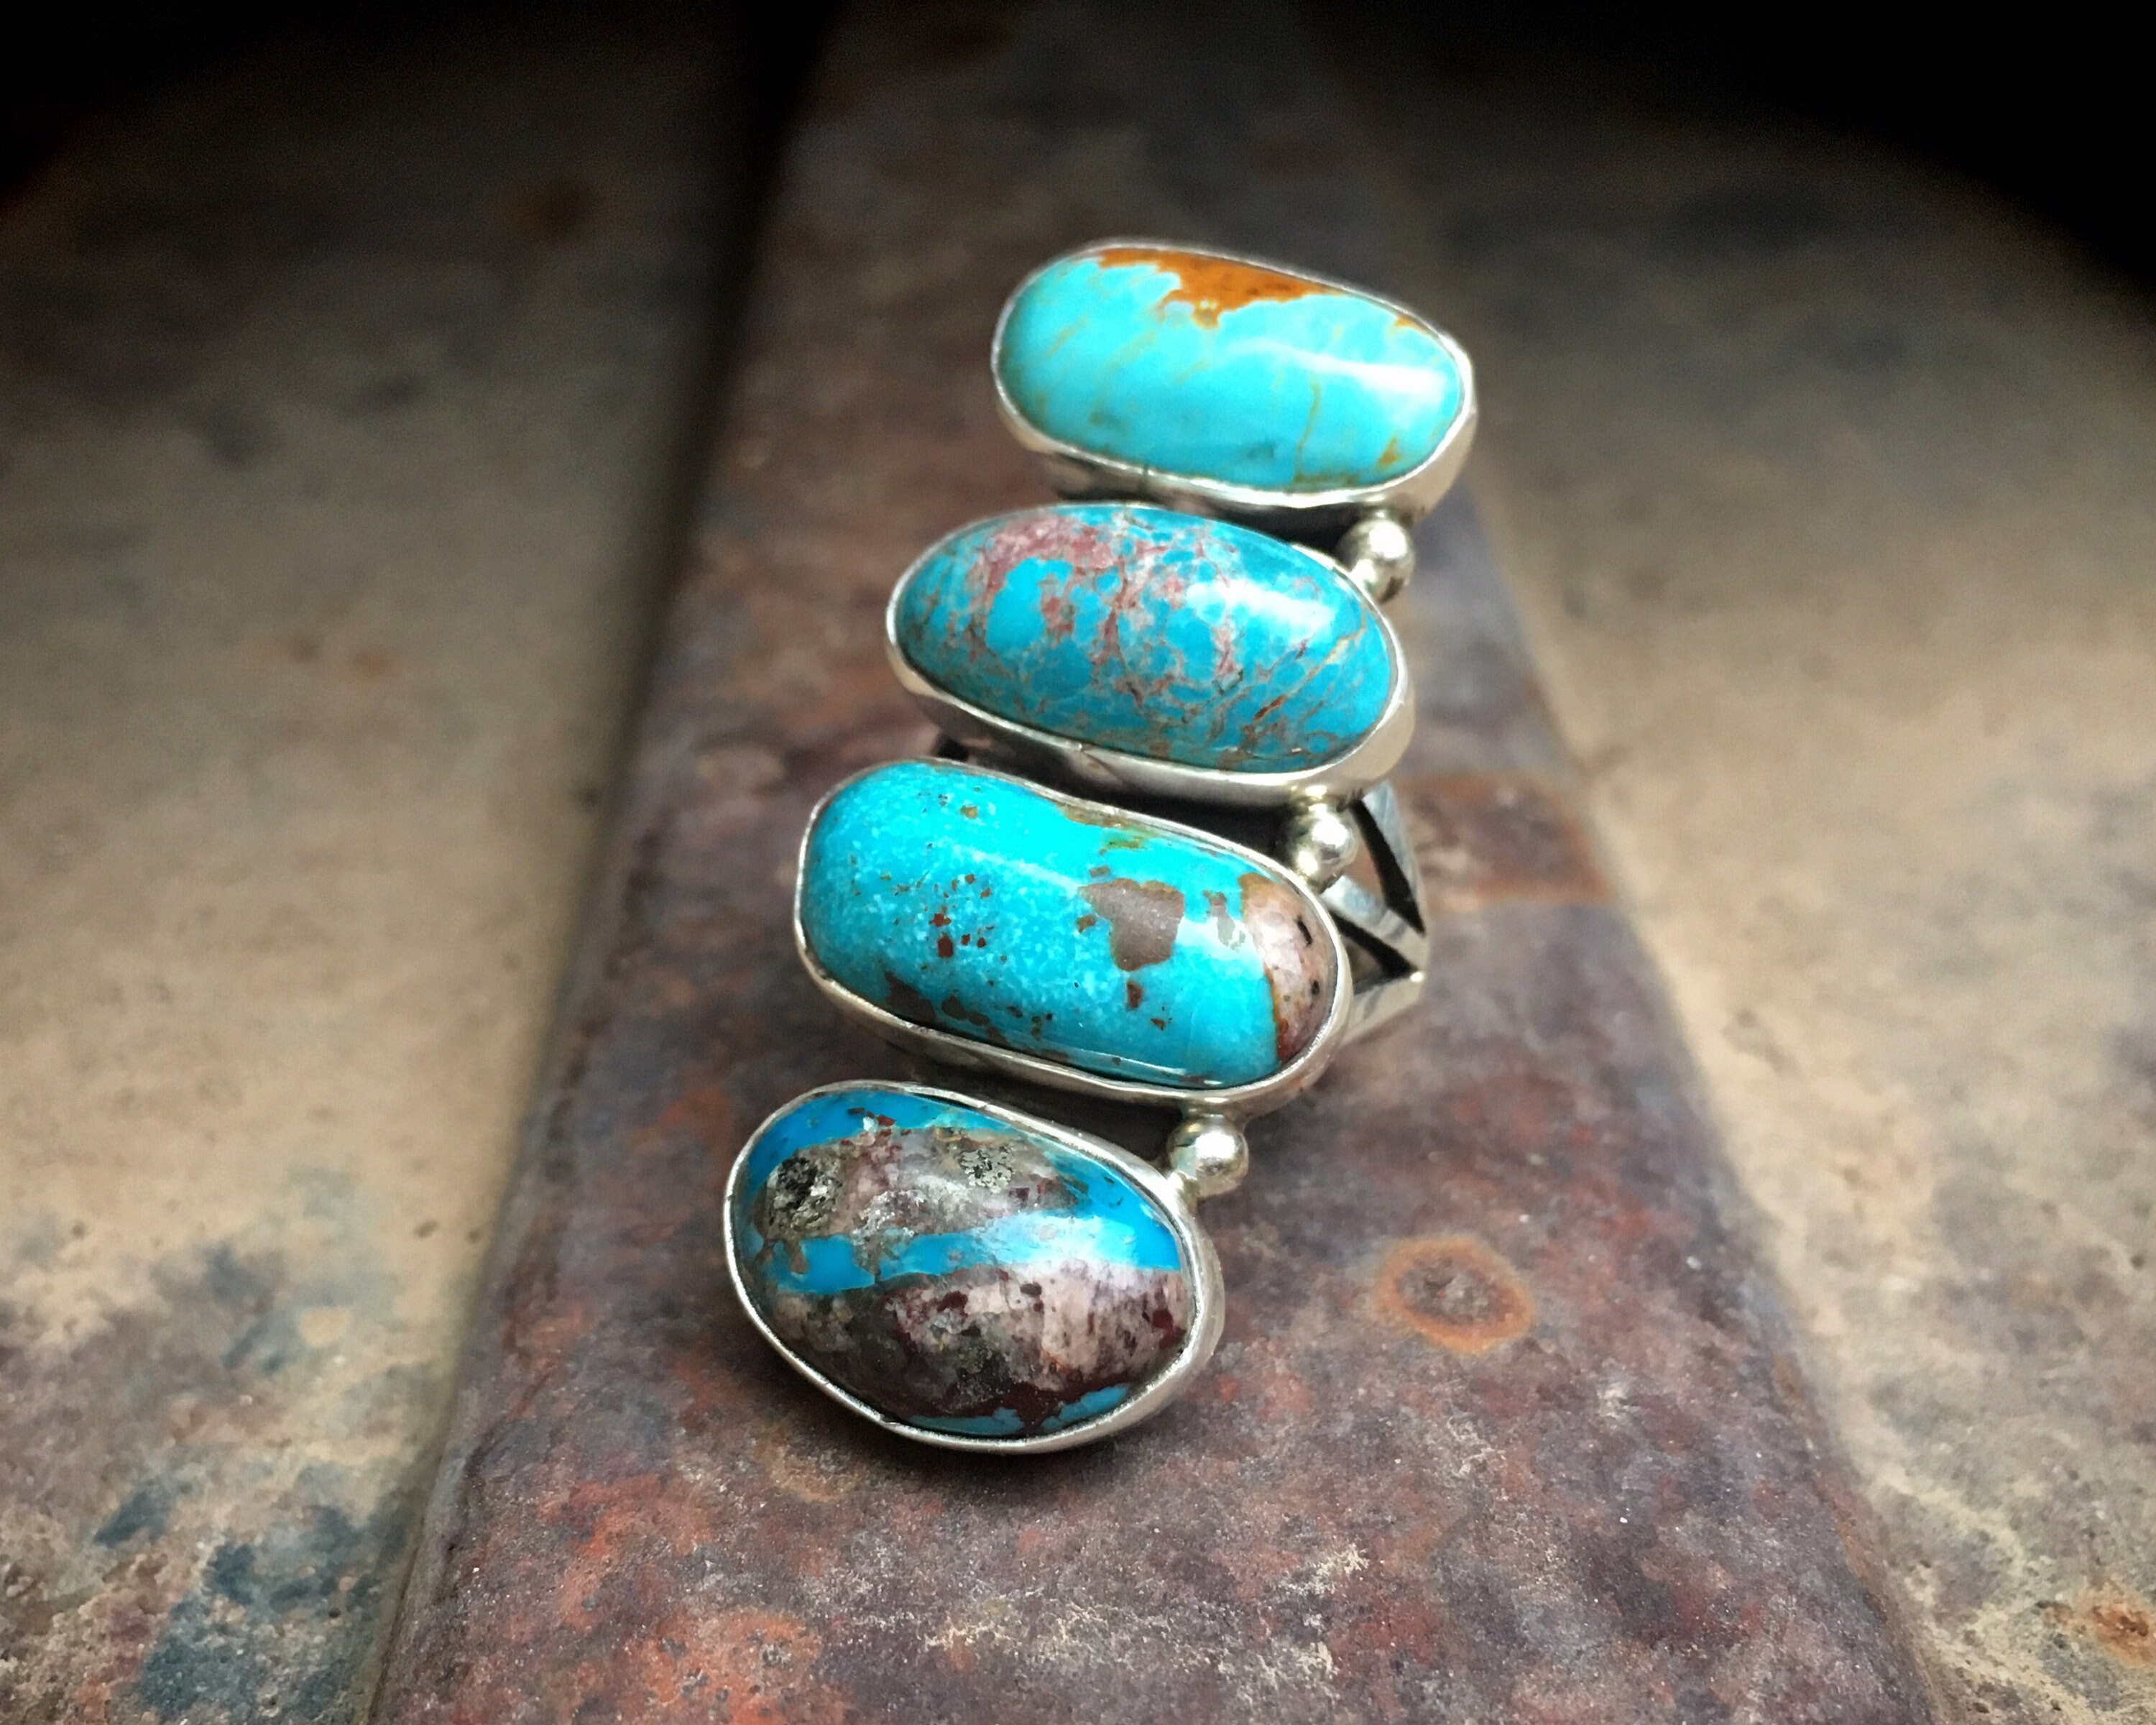 Big 17g Turquoise Ring Size 7.5 by Navajo Mary Jane Garcia